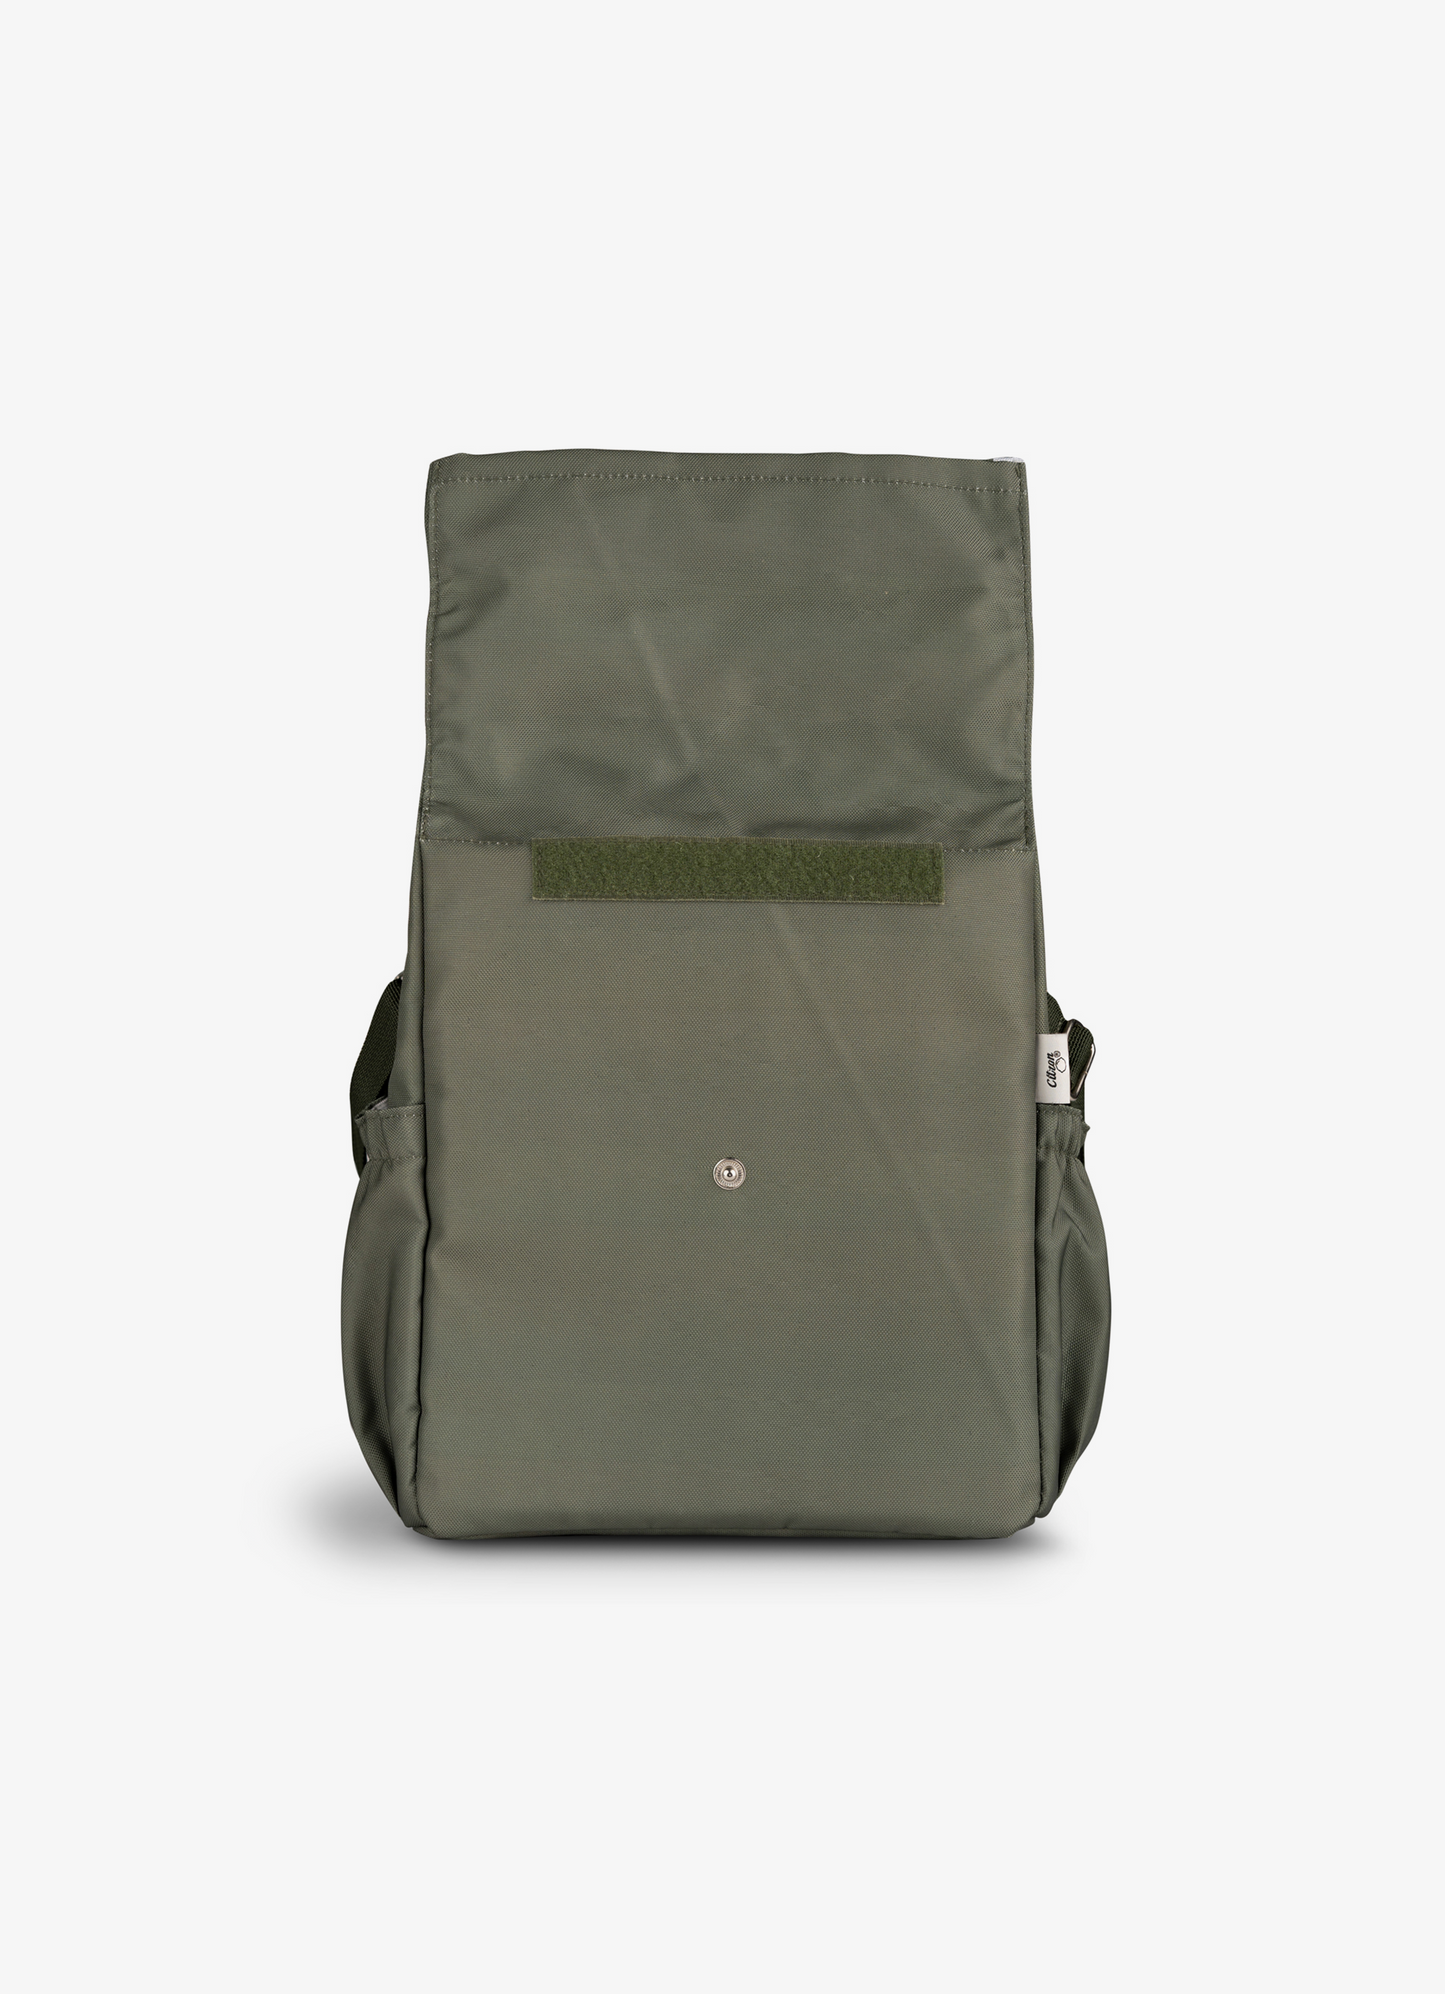 Citron Insulated Rollup Lunchbag - Olive Green - Laadlee